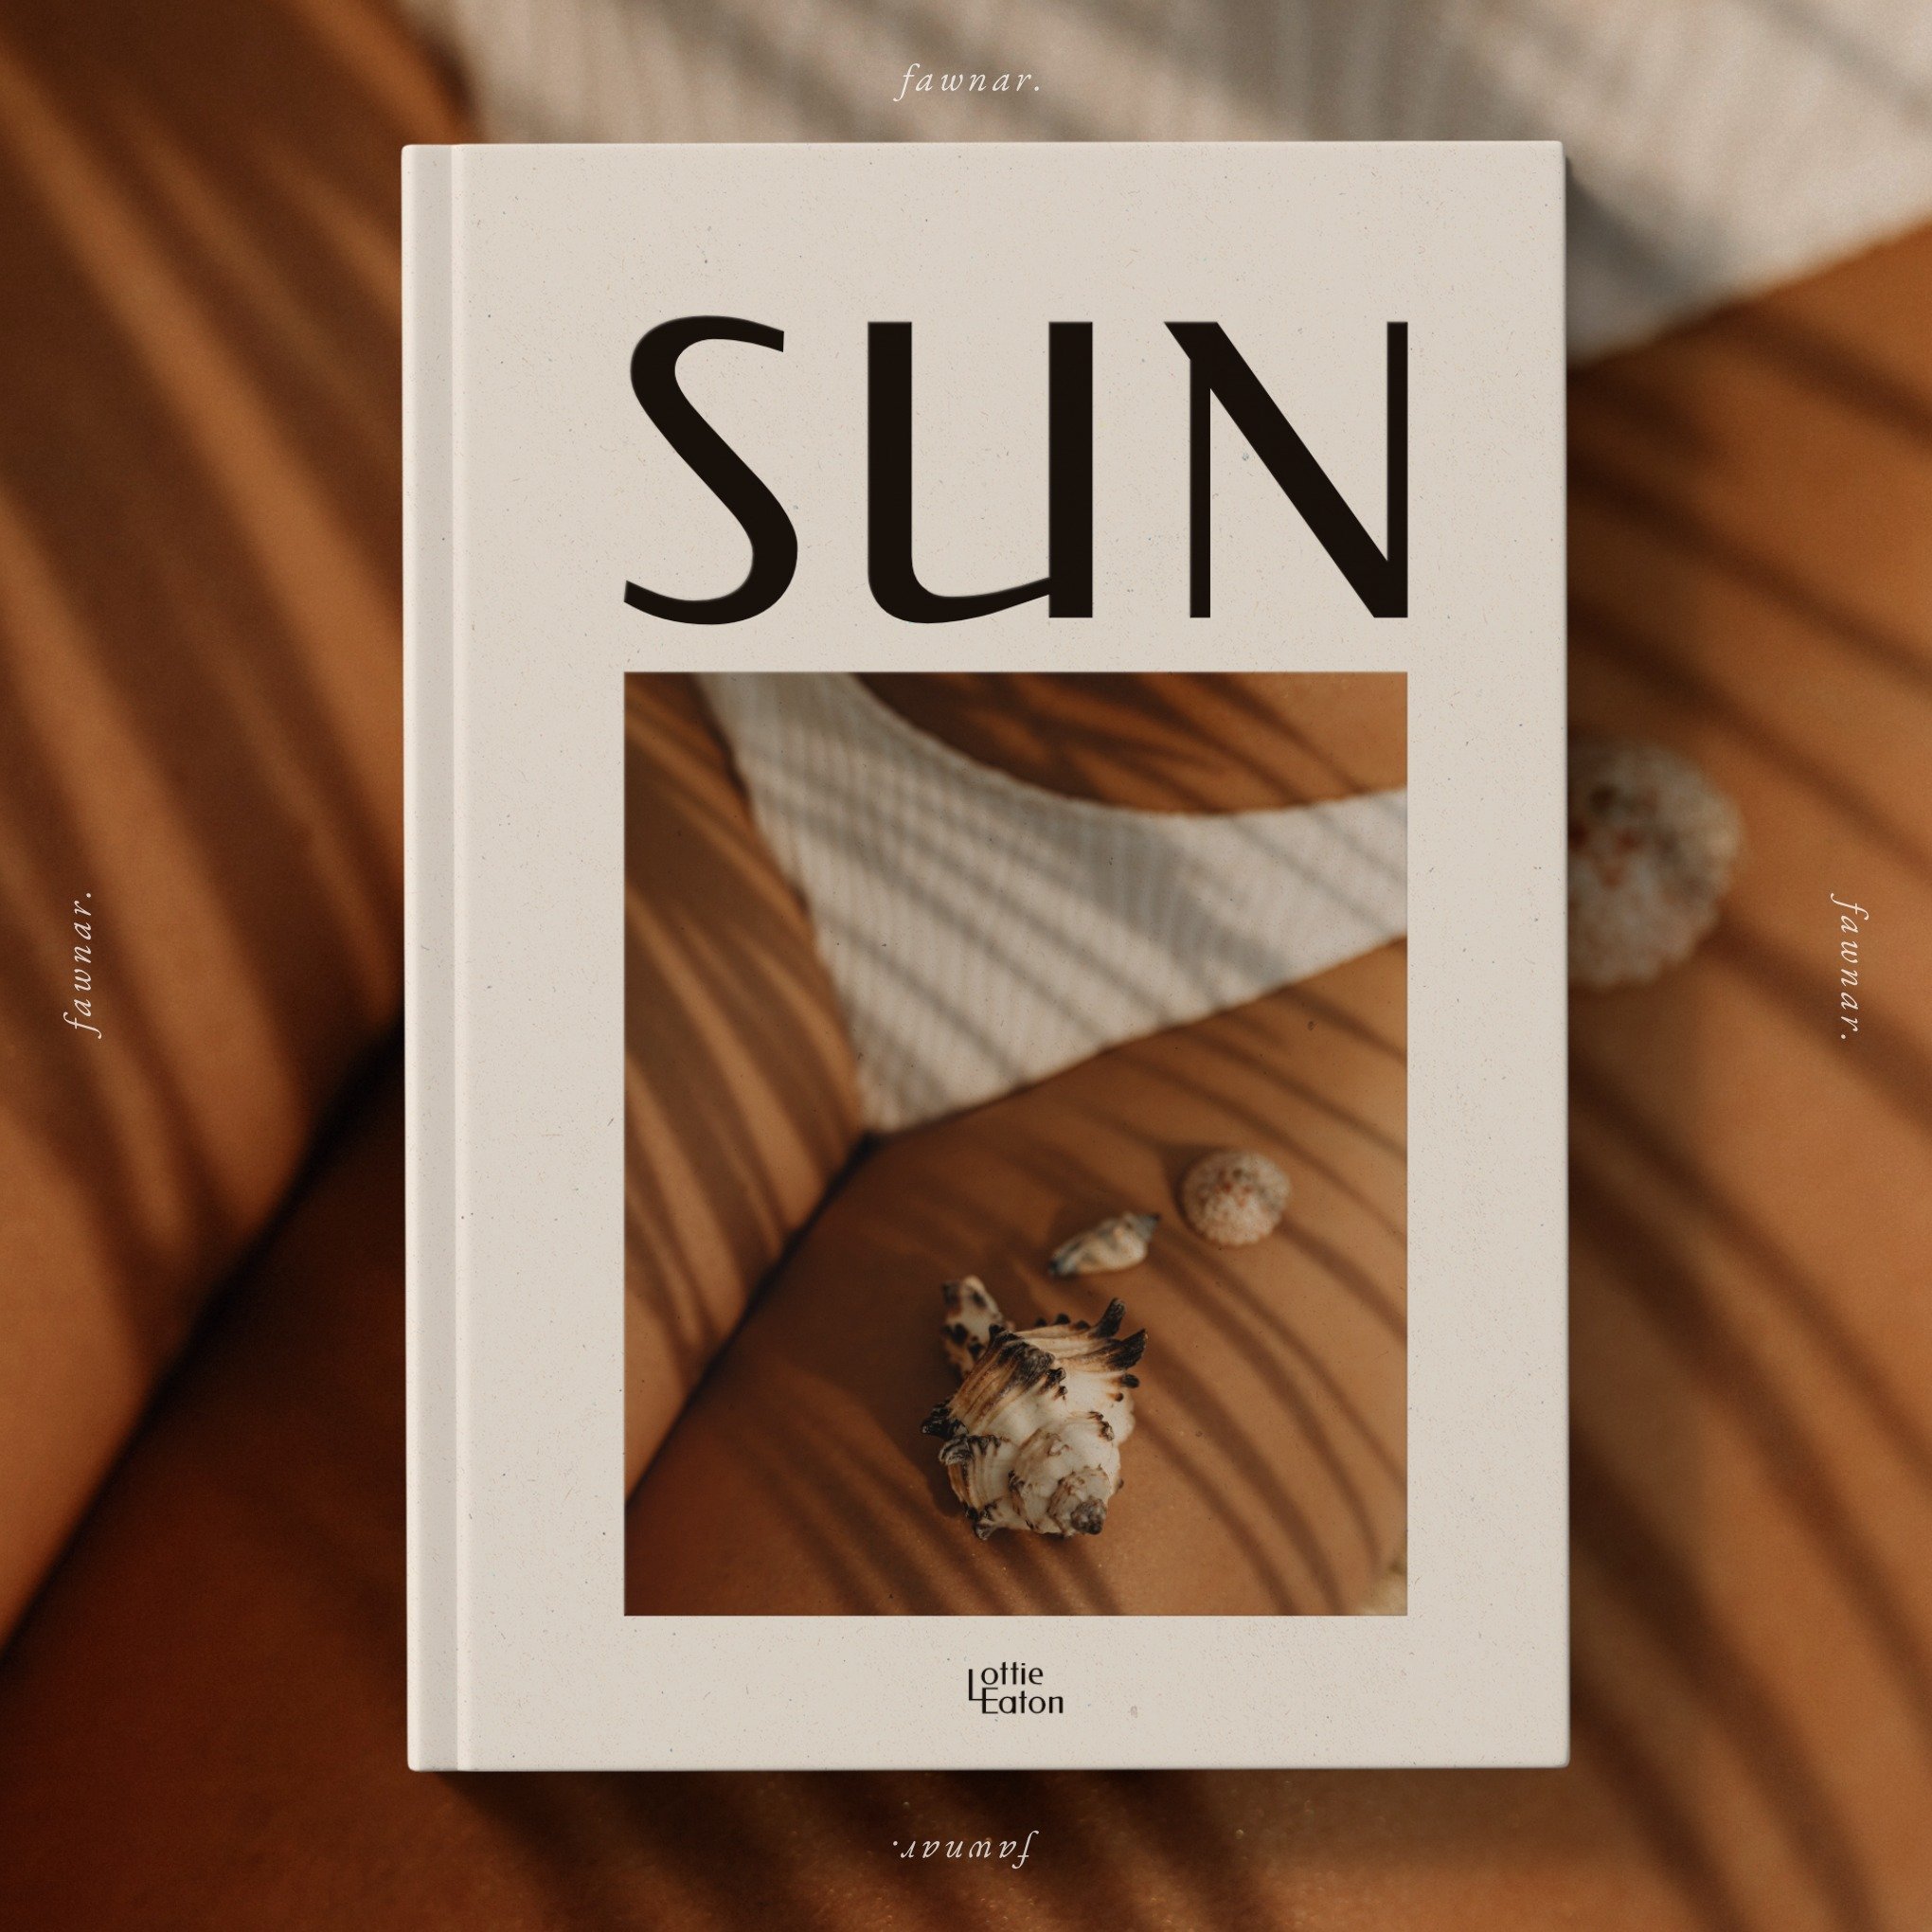 SUN - An aesthetic and minimal coffee table book design.

If you are after curated, aligned and warm designs, we're your people. 
At fawnar. we specialise in logo and branding, Squarespace website design, and wedding &amp; event stationery.

#fawnar 